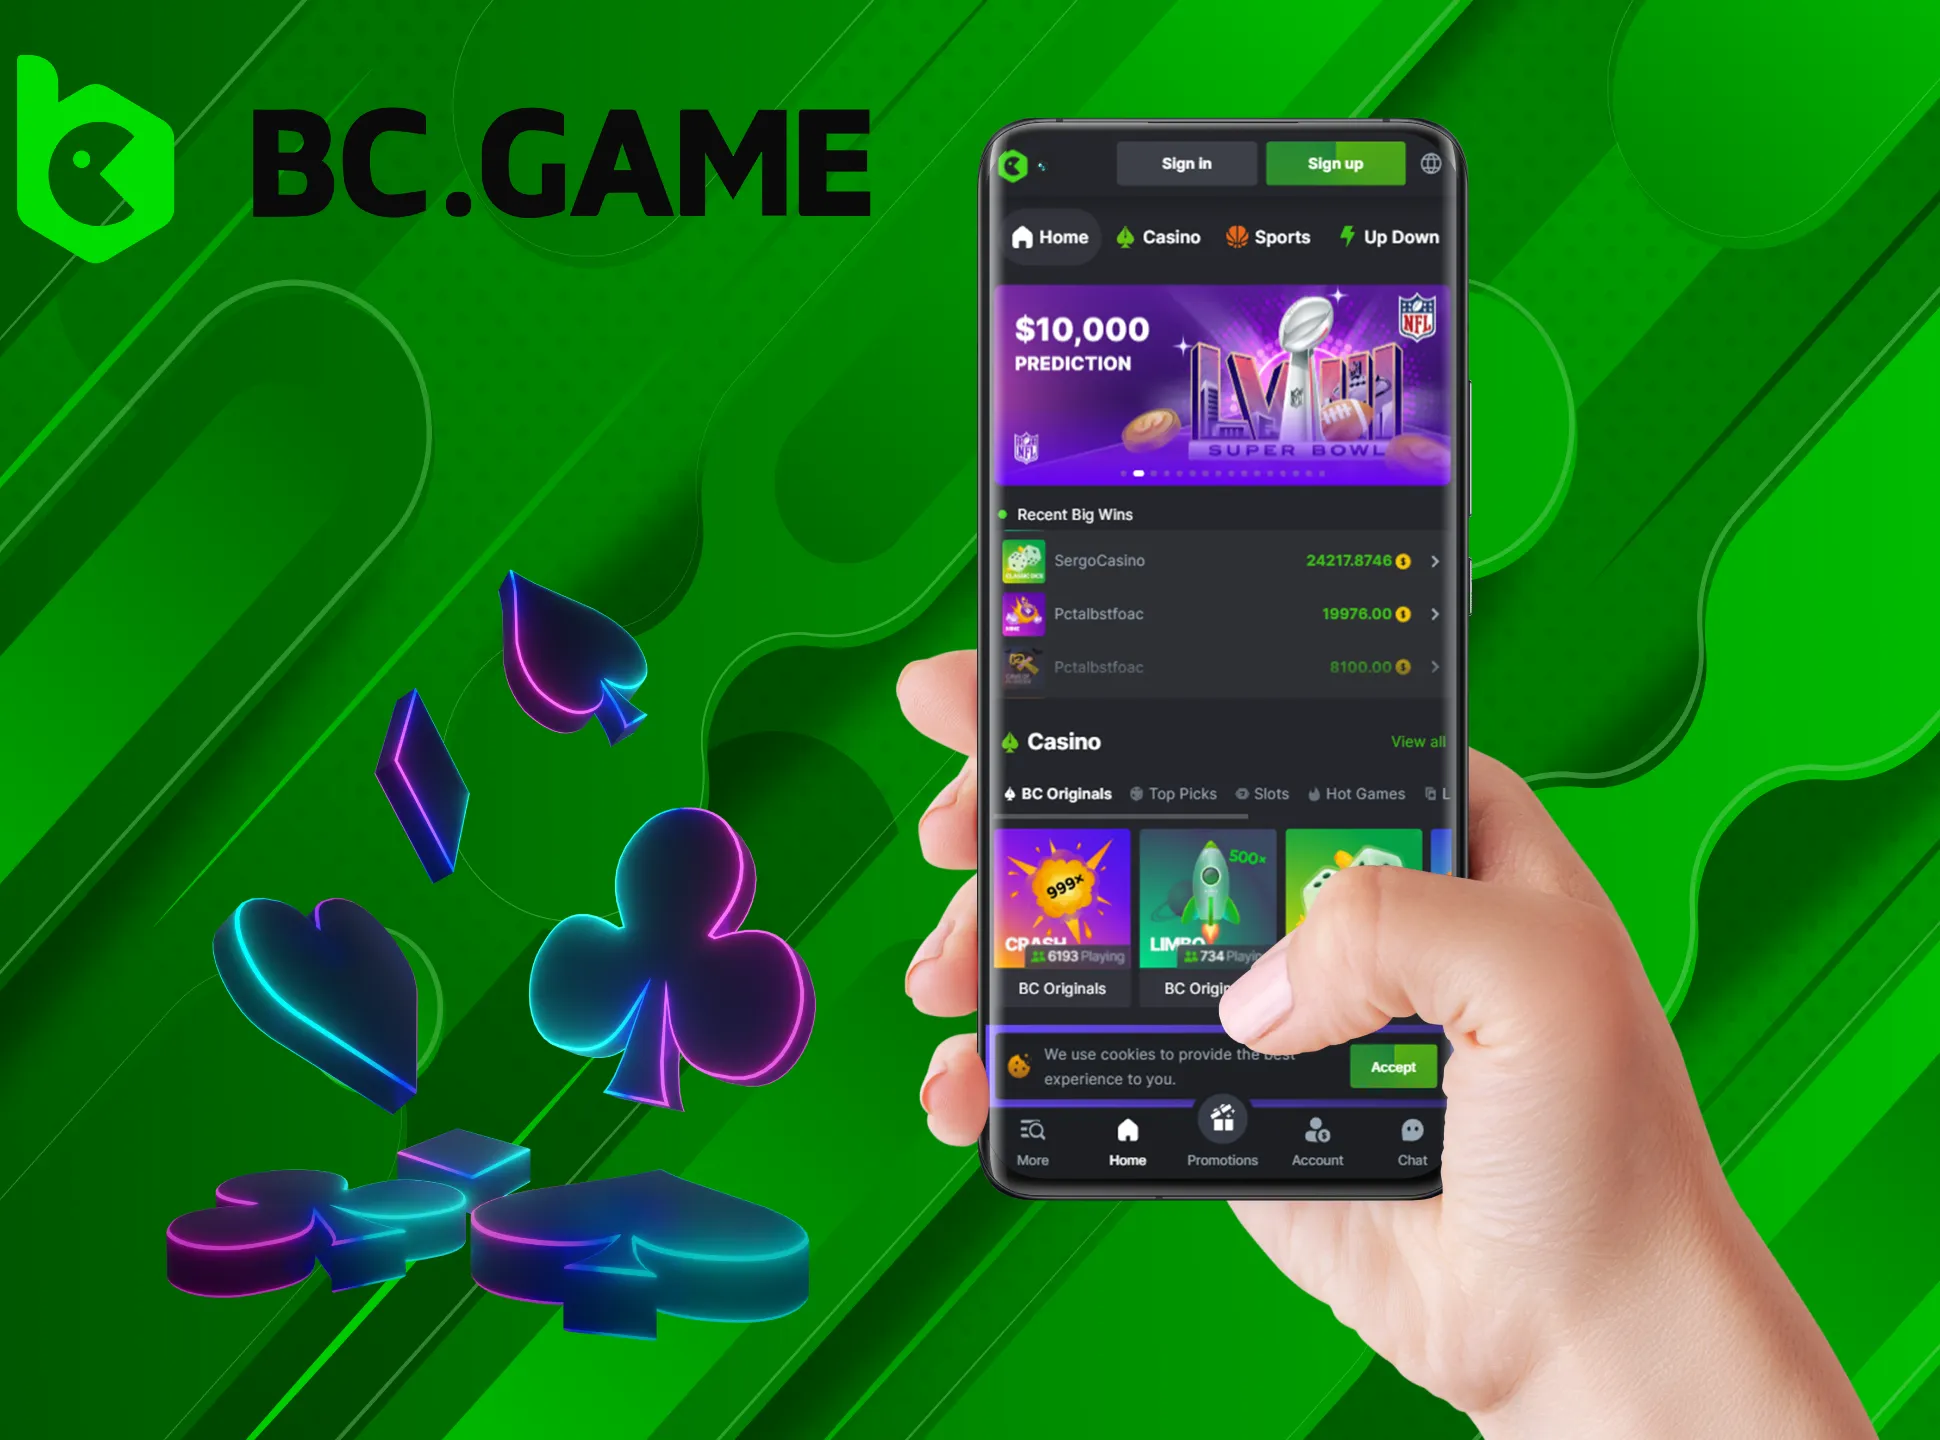 The mobile version of BC Game is just as good and fast as the app.